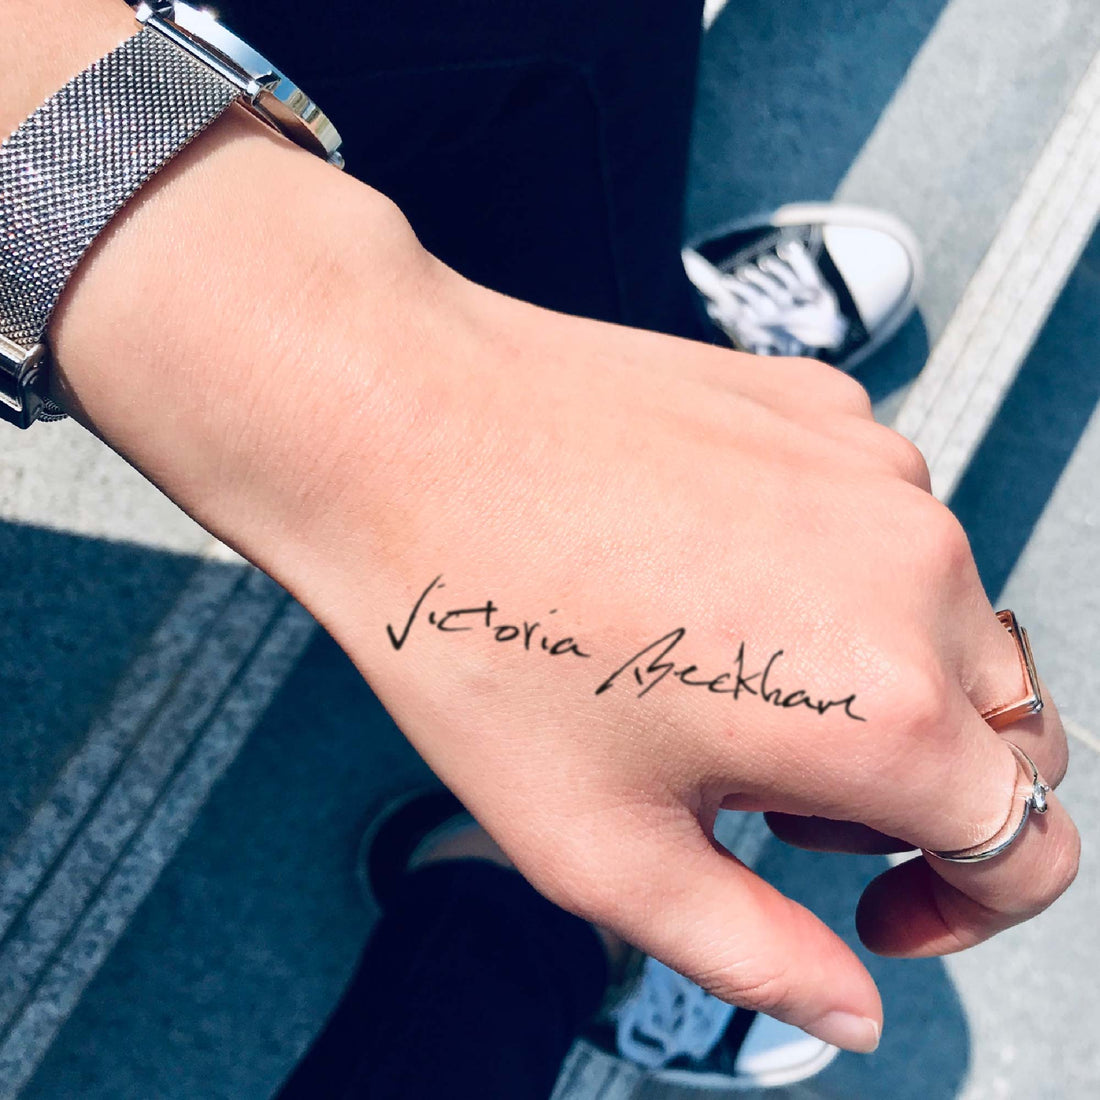 Victoria Beckham custom temporary tattoo sticker design idea inspiration meanings removal arm wrist hand words font name signature calligraphy lyrics tour concert outfits merch accessory gift souvenir costumes wear dress up code